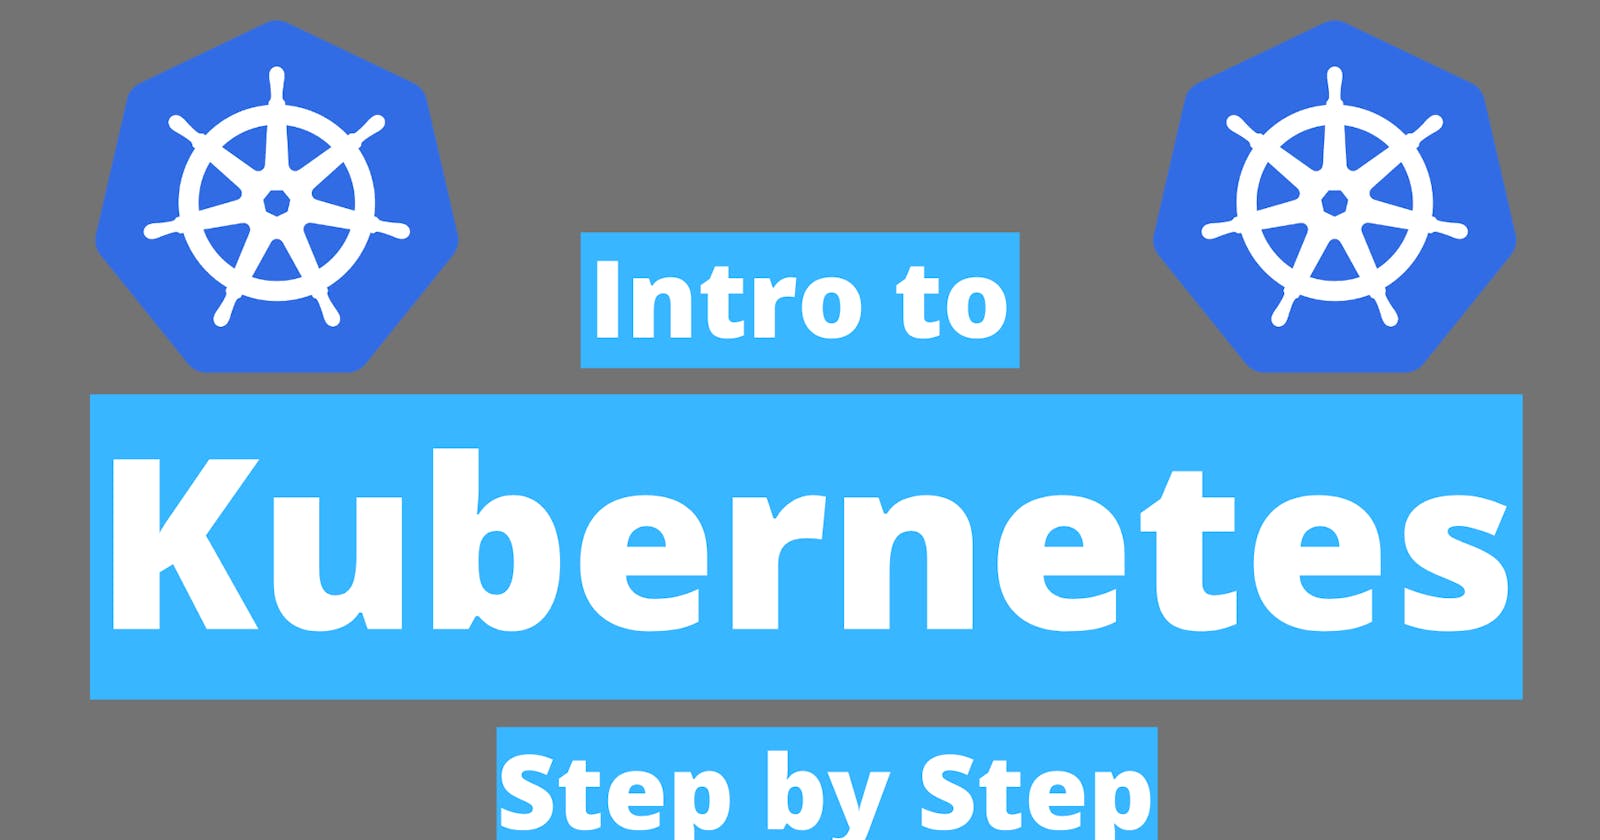 Intro to Kubernetes - Step by Step